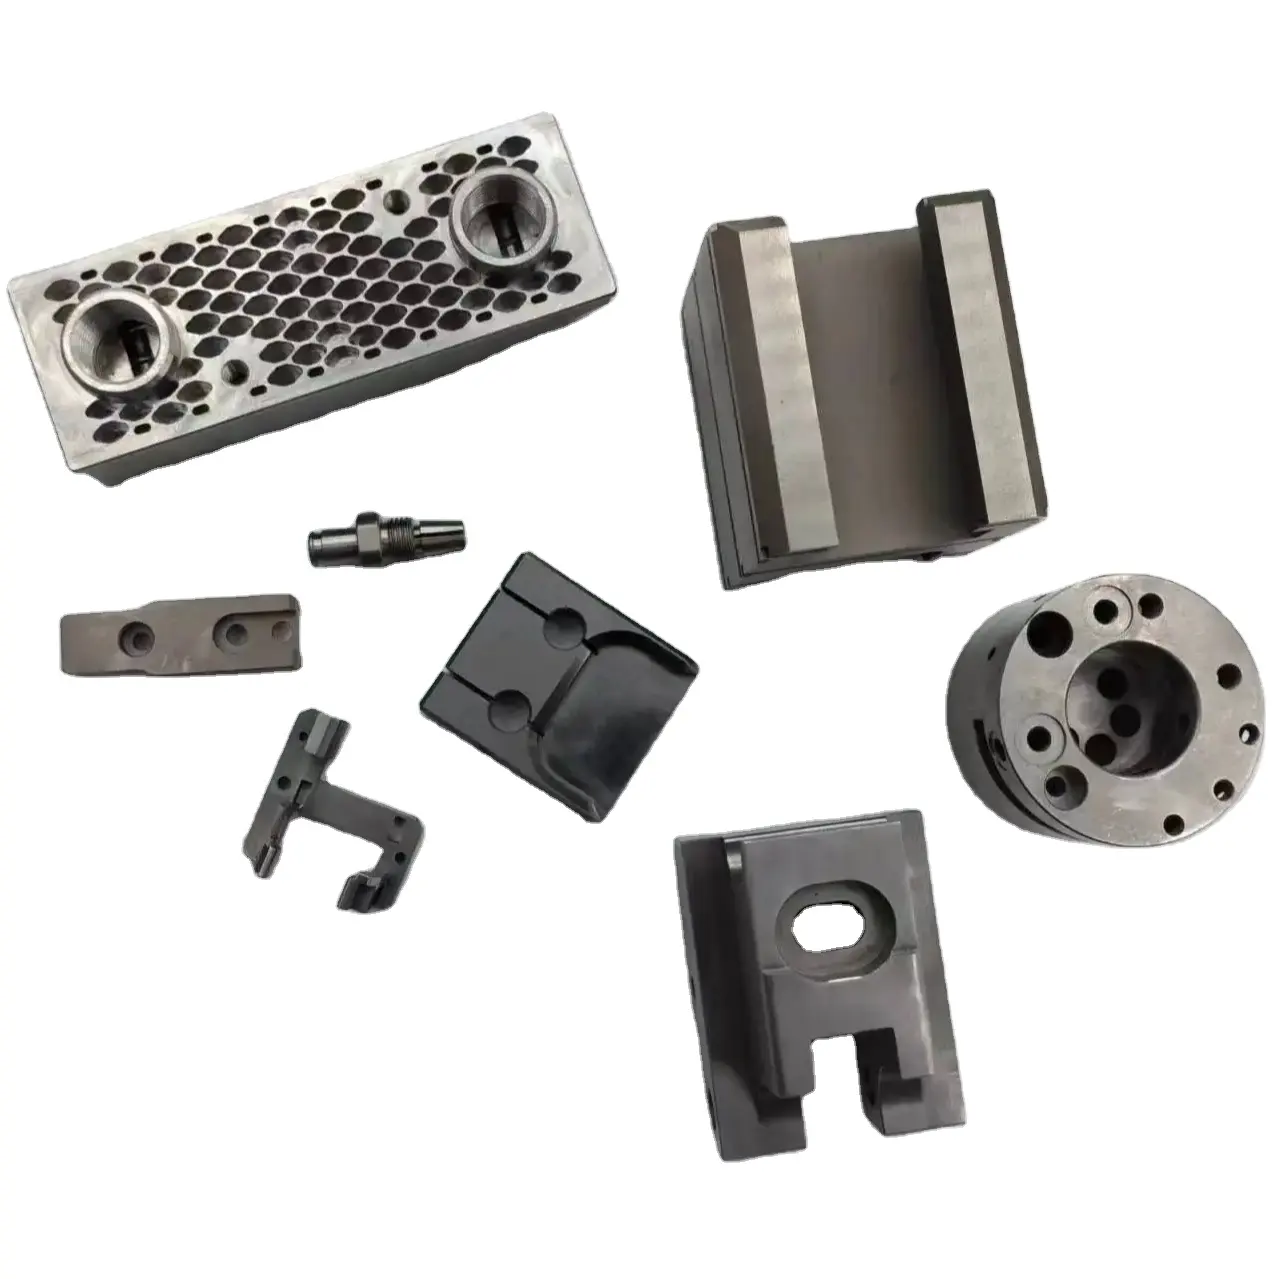 High quality low price aluminum stainless steel precision CNC turning parts customization